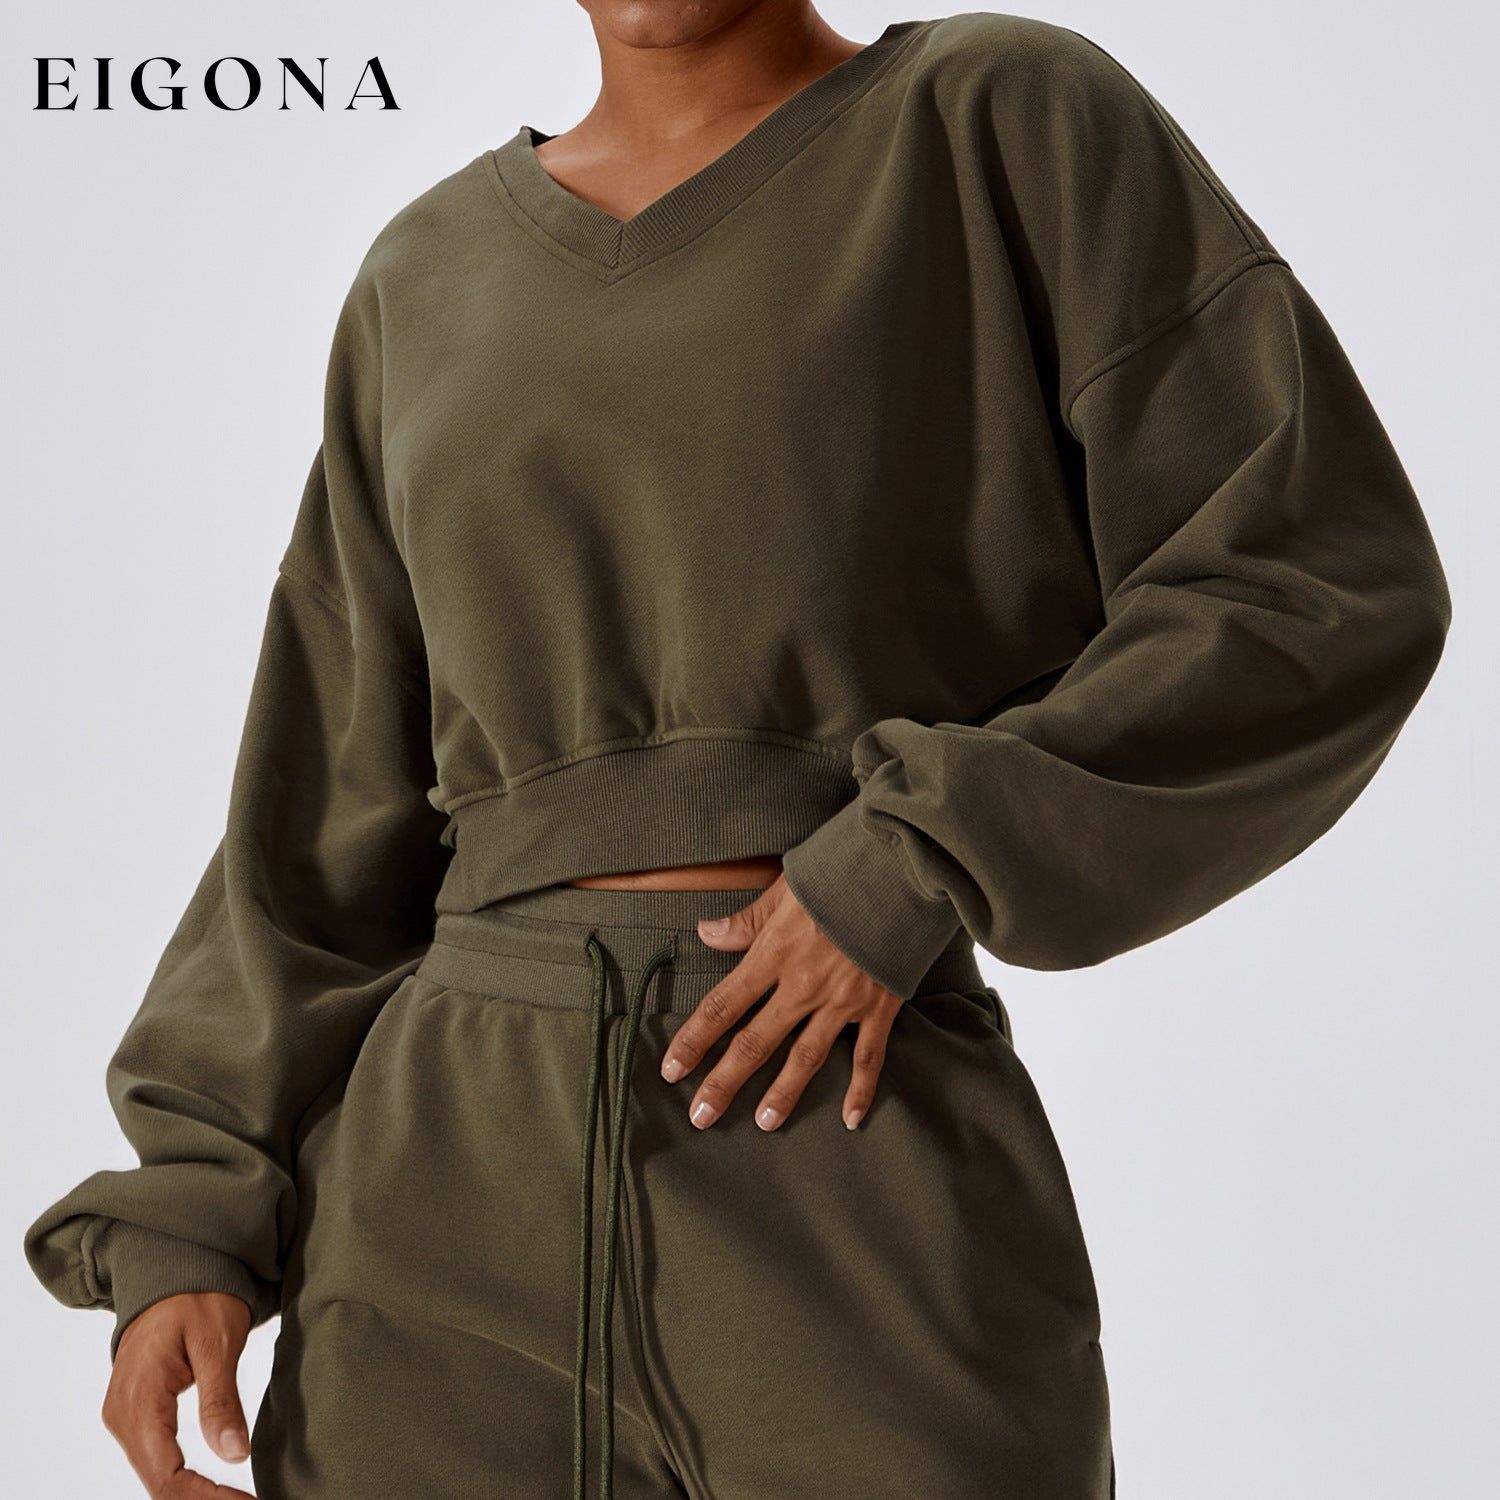 Loose Long Sleeve Sweatshirt Outdoor Keep Warm V Neck Pullover All Matching Casual Sweatshirt Top Olive Green 2 pieces clothes lounge sets sweaters